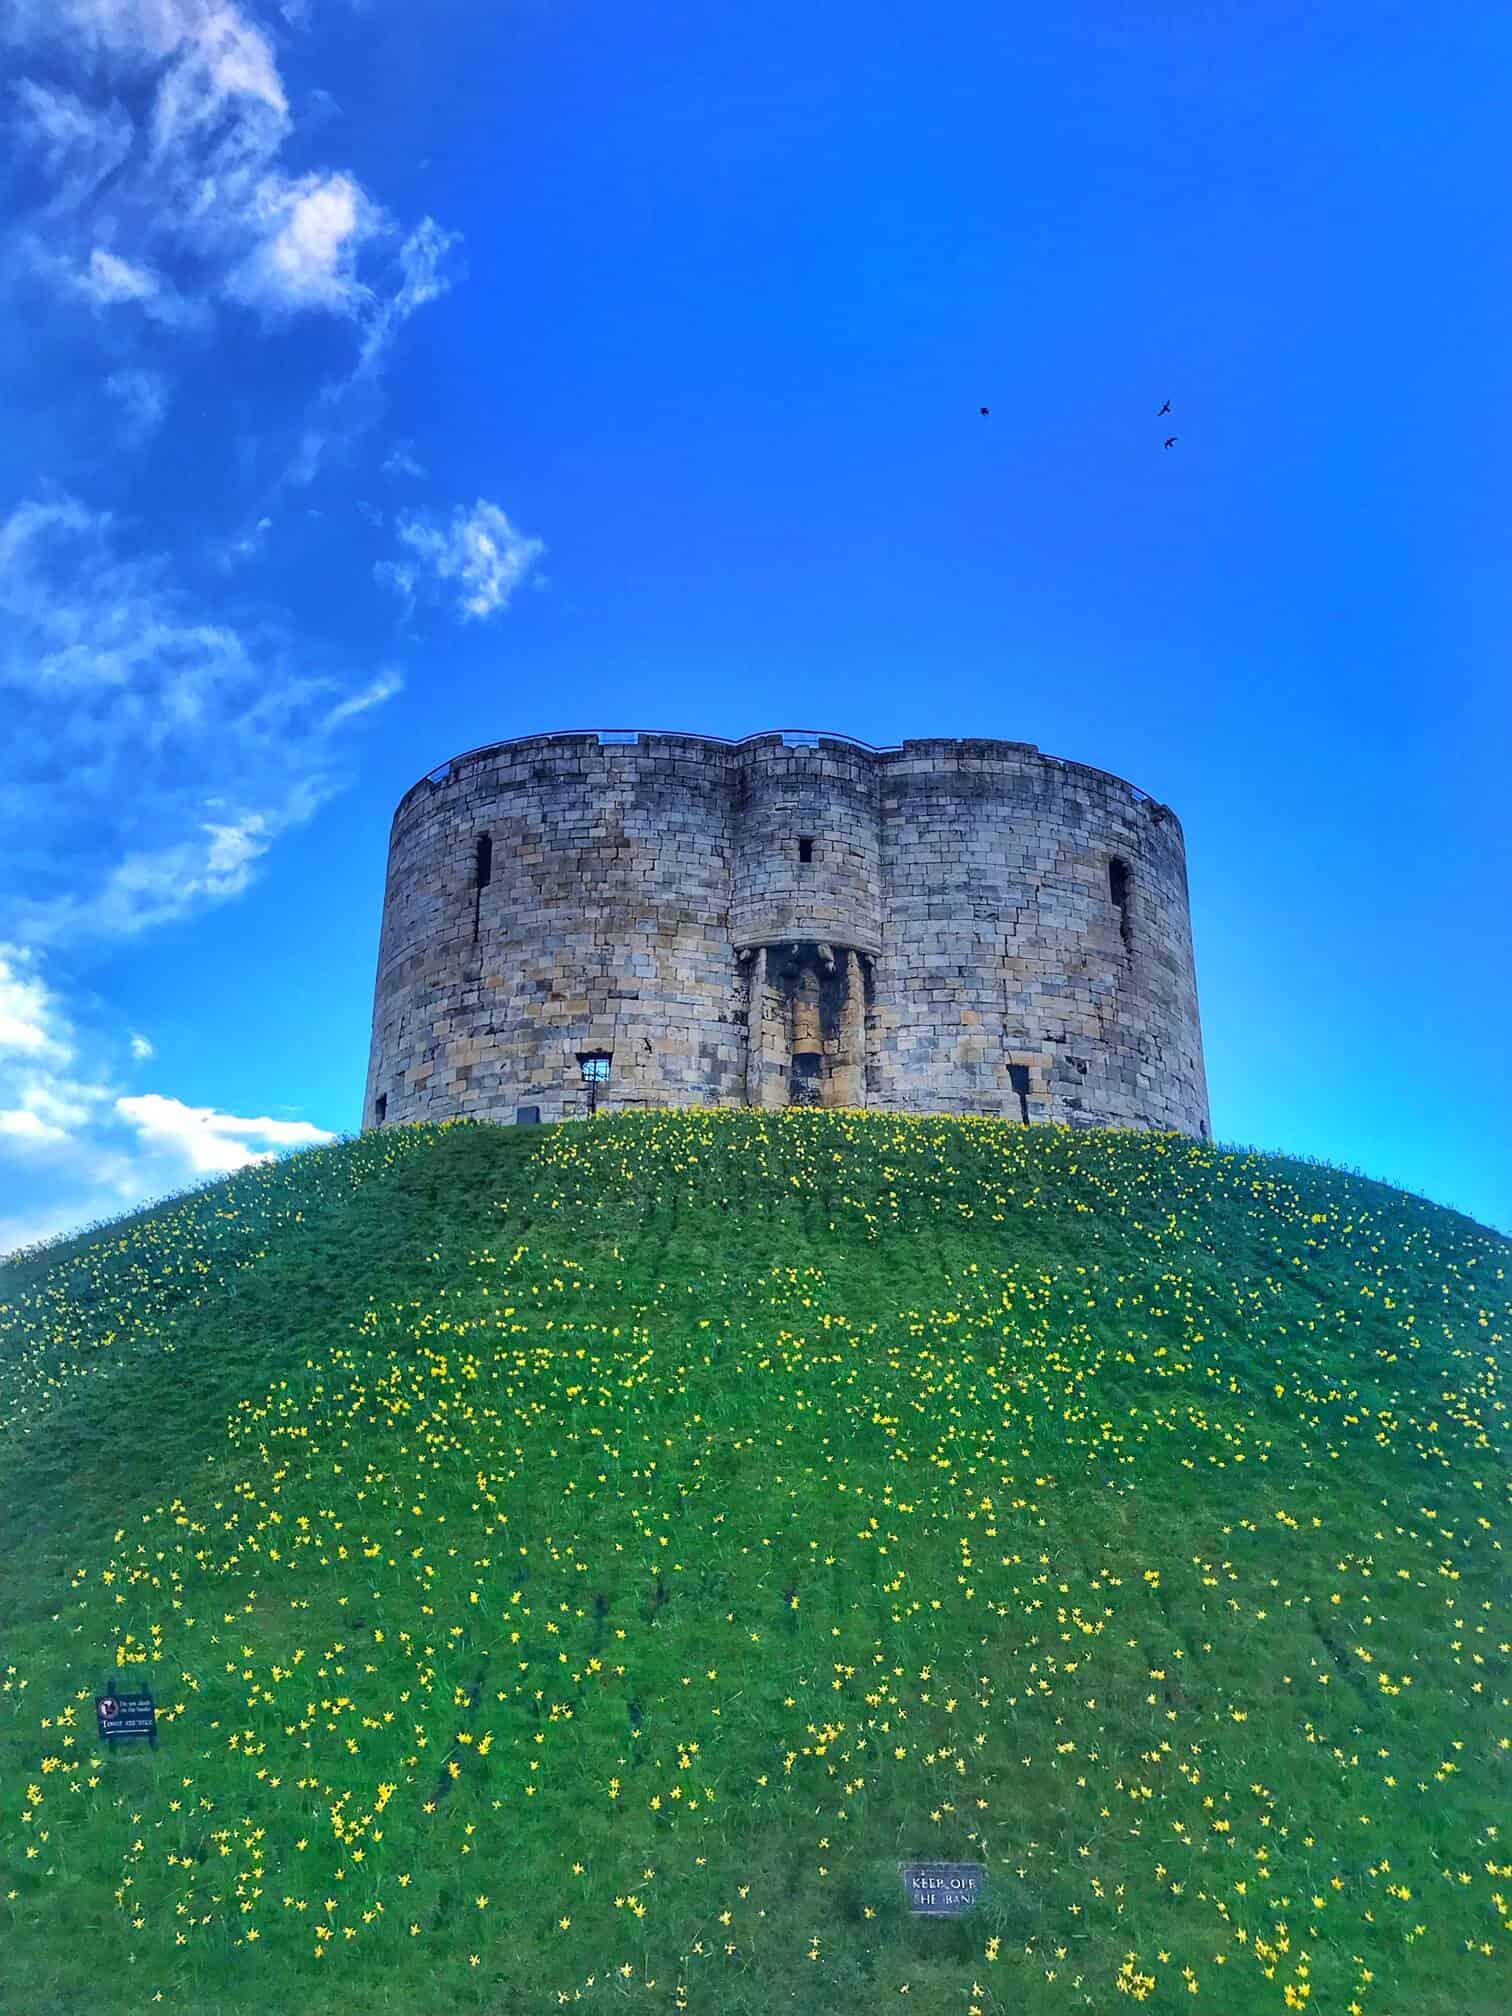 View looking up towards cliffords tower in York with daffodils on the hillside